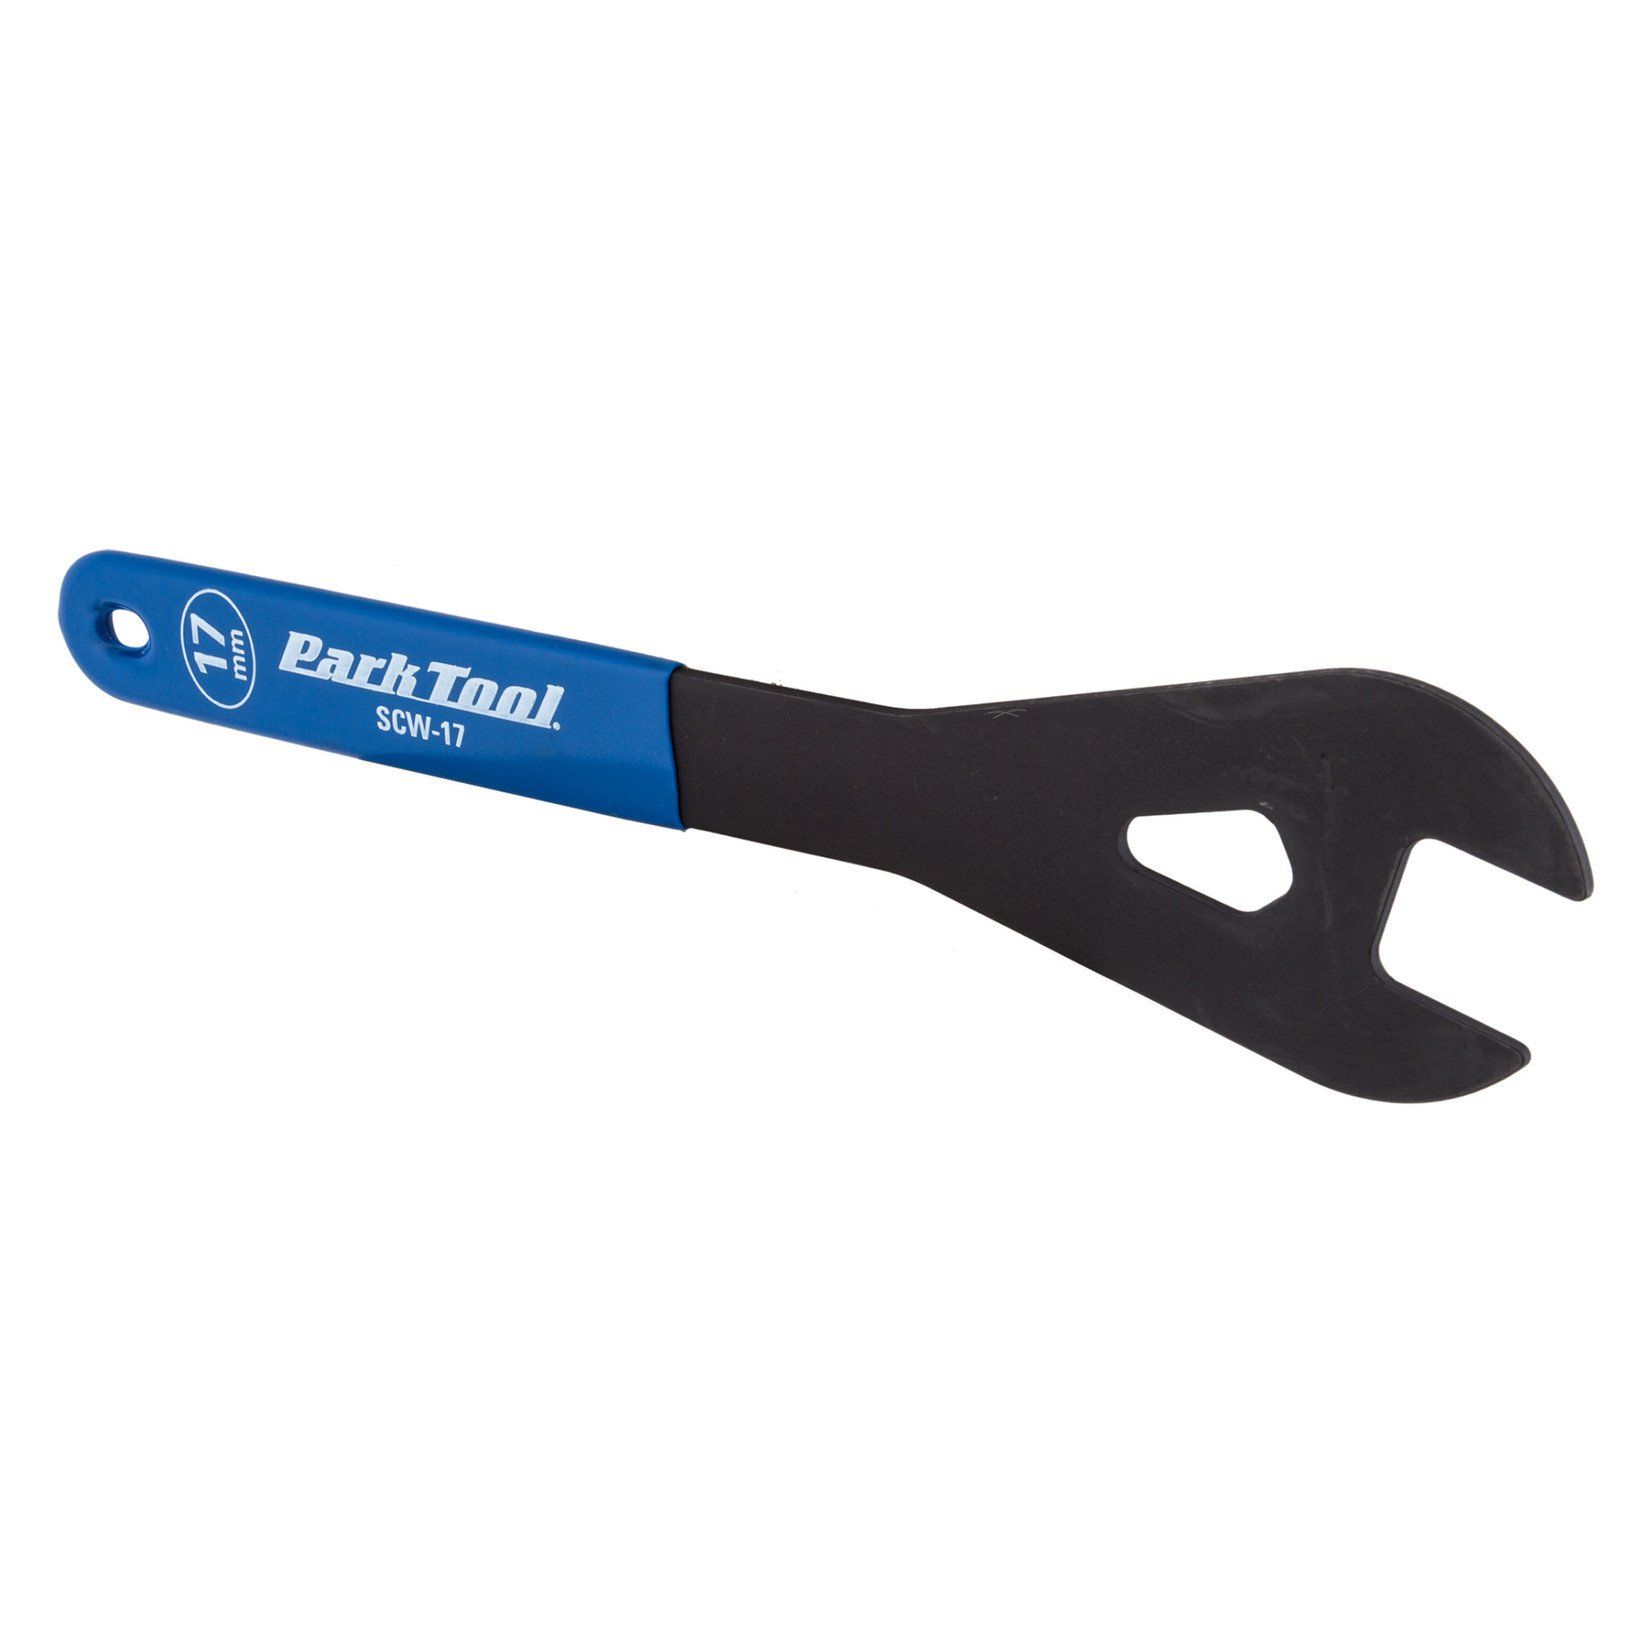 Park Tool Park Tool SCW-17 Cone Wrench 17mm